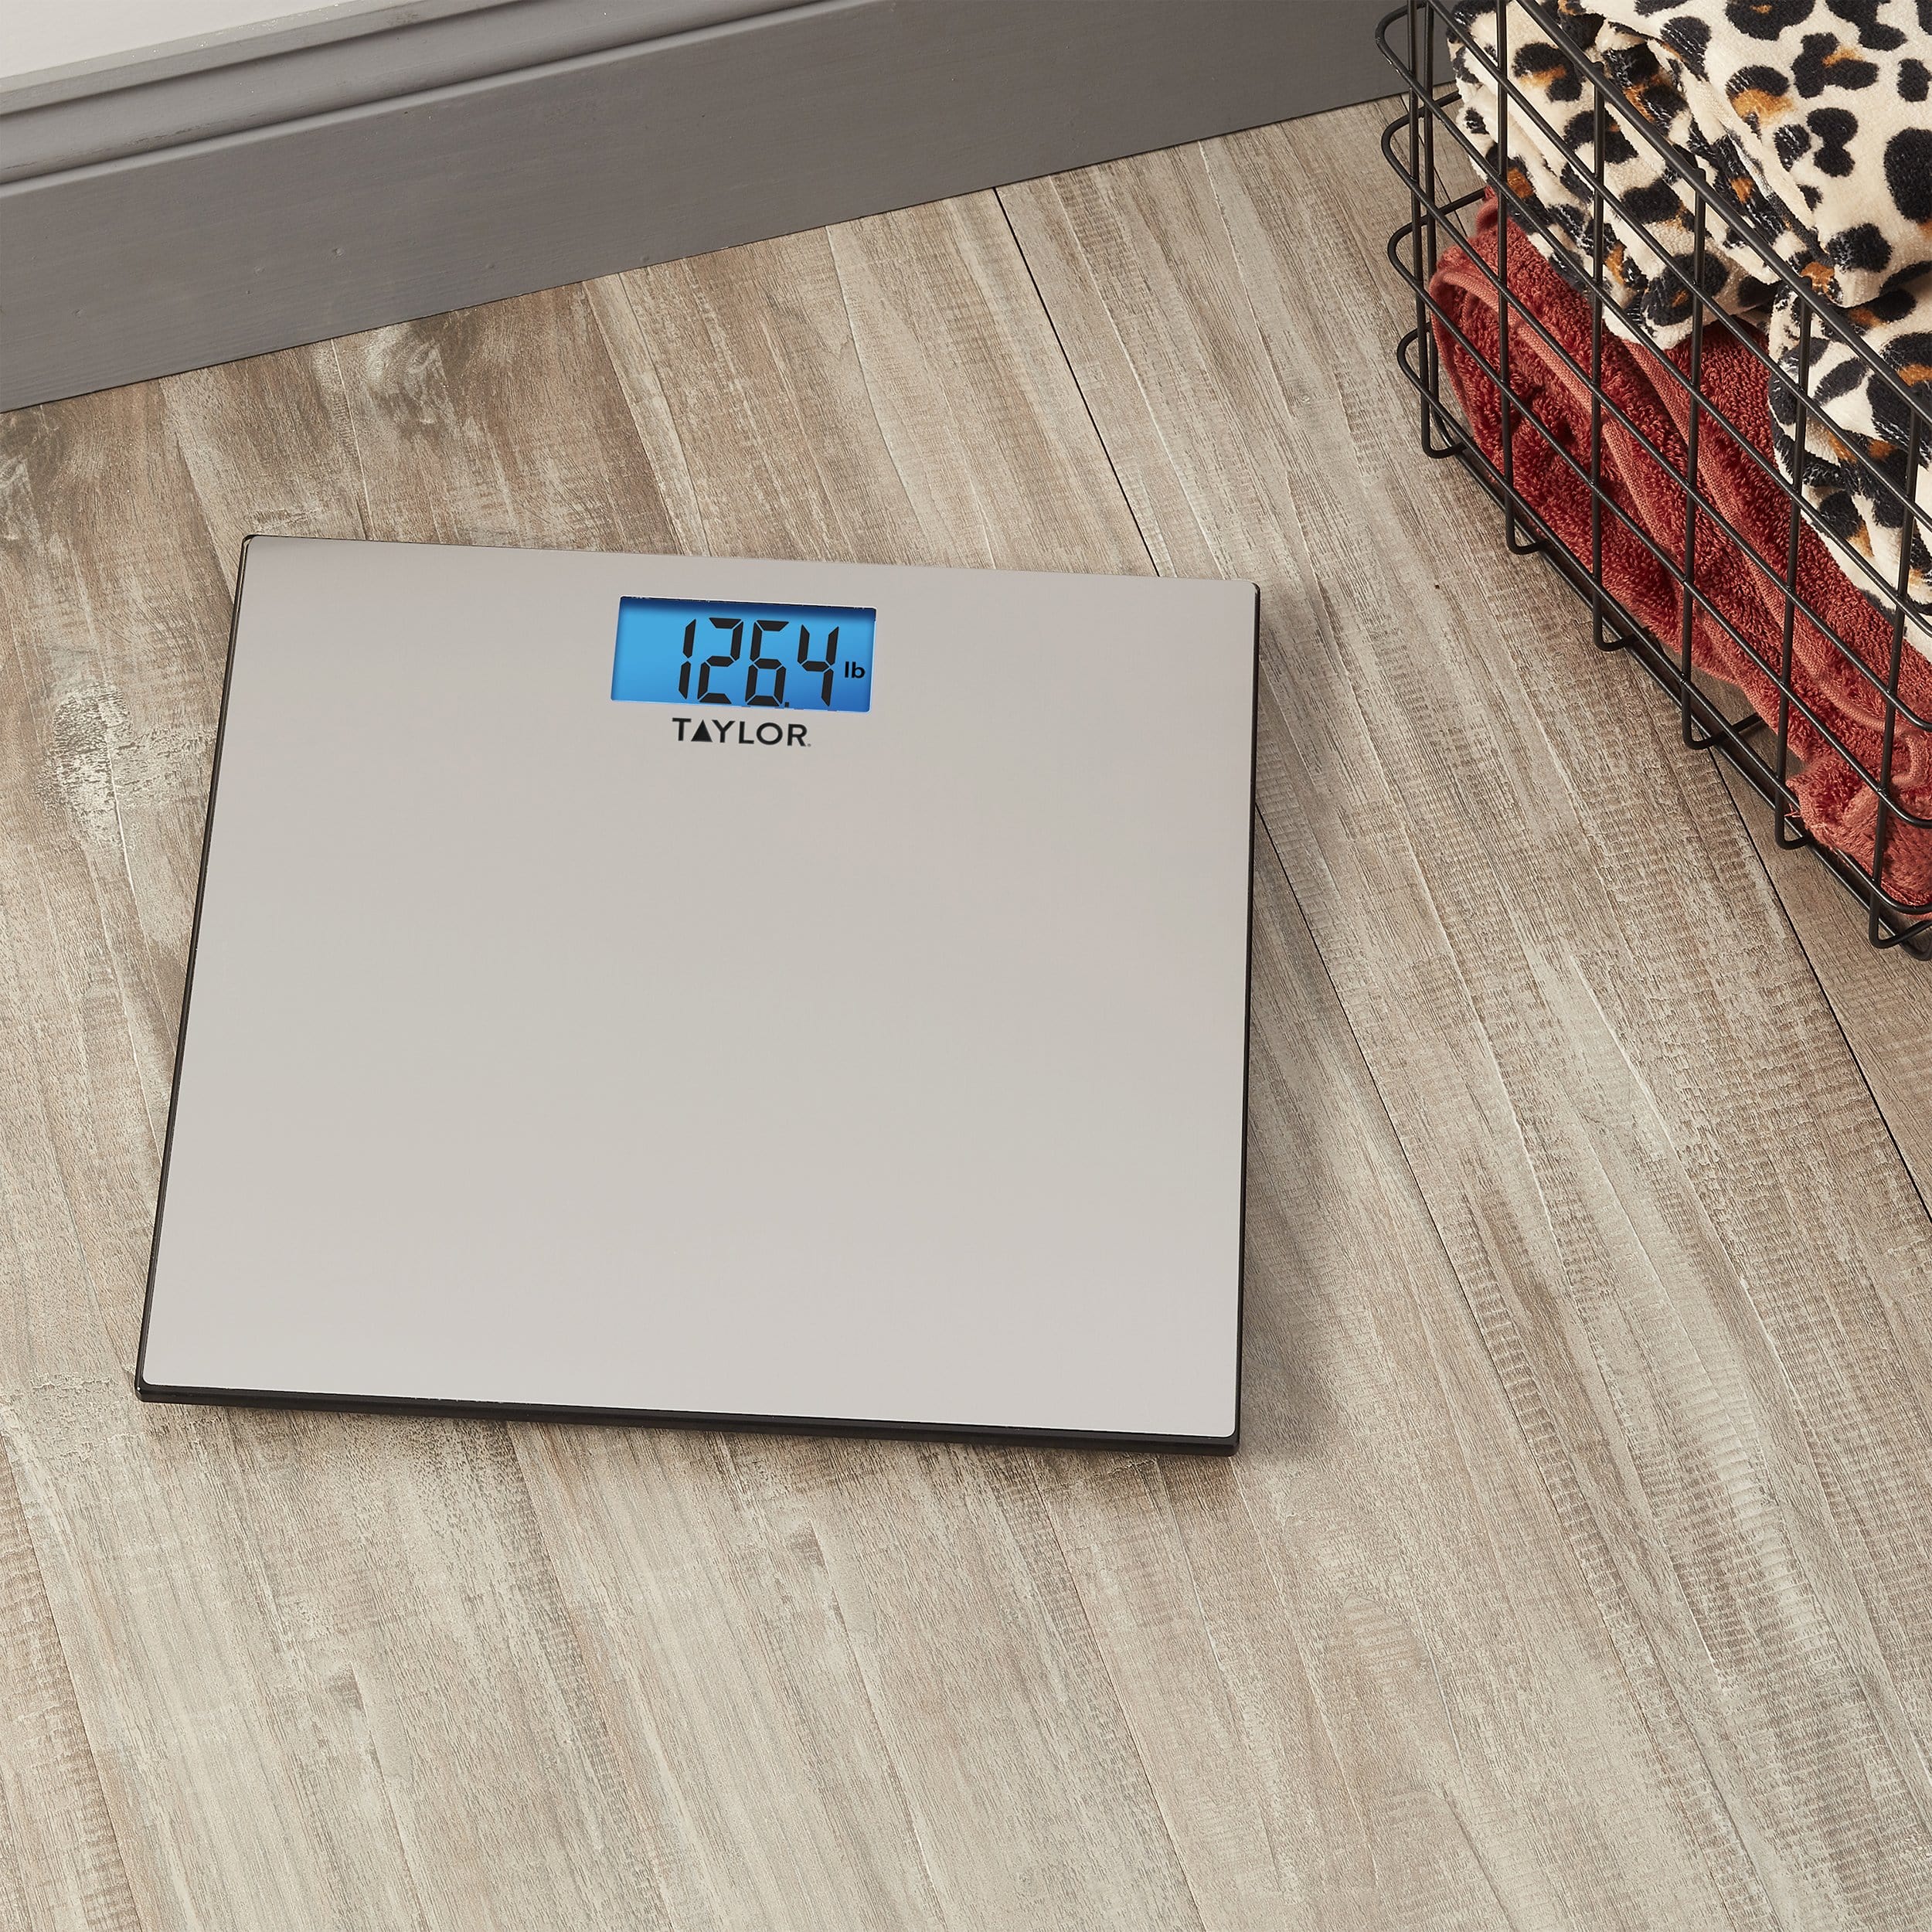 Taylor 7403 Digital Brushed Stainless Steel Bathroom Scale, Silver